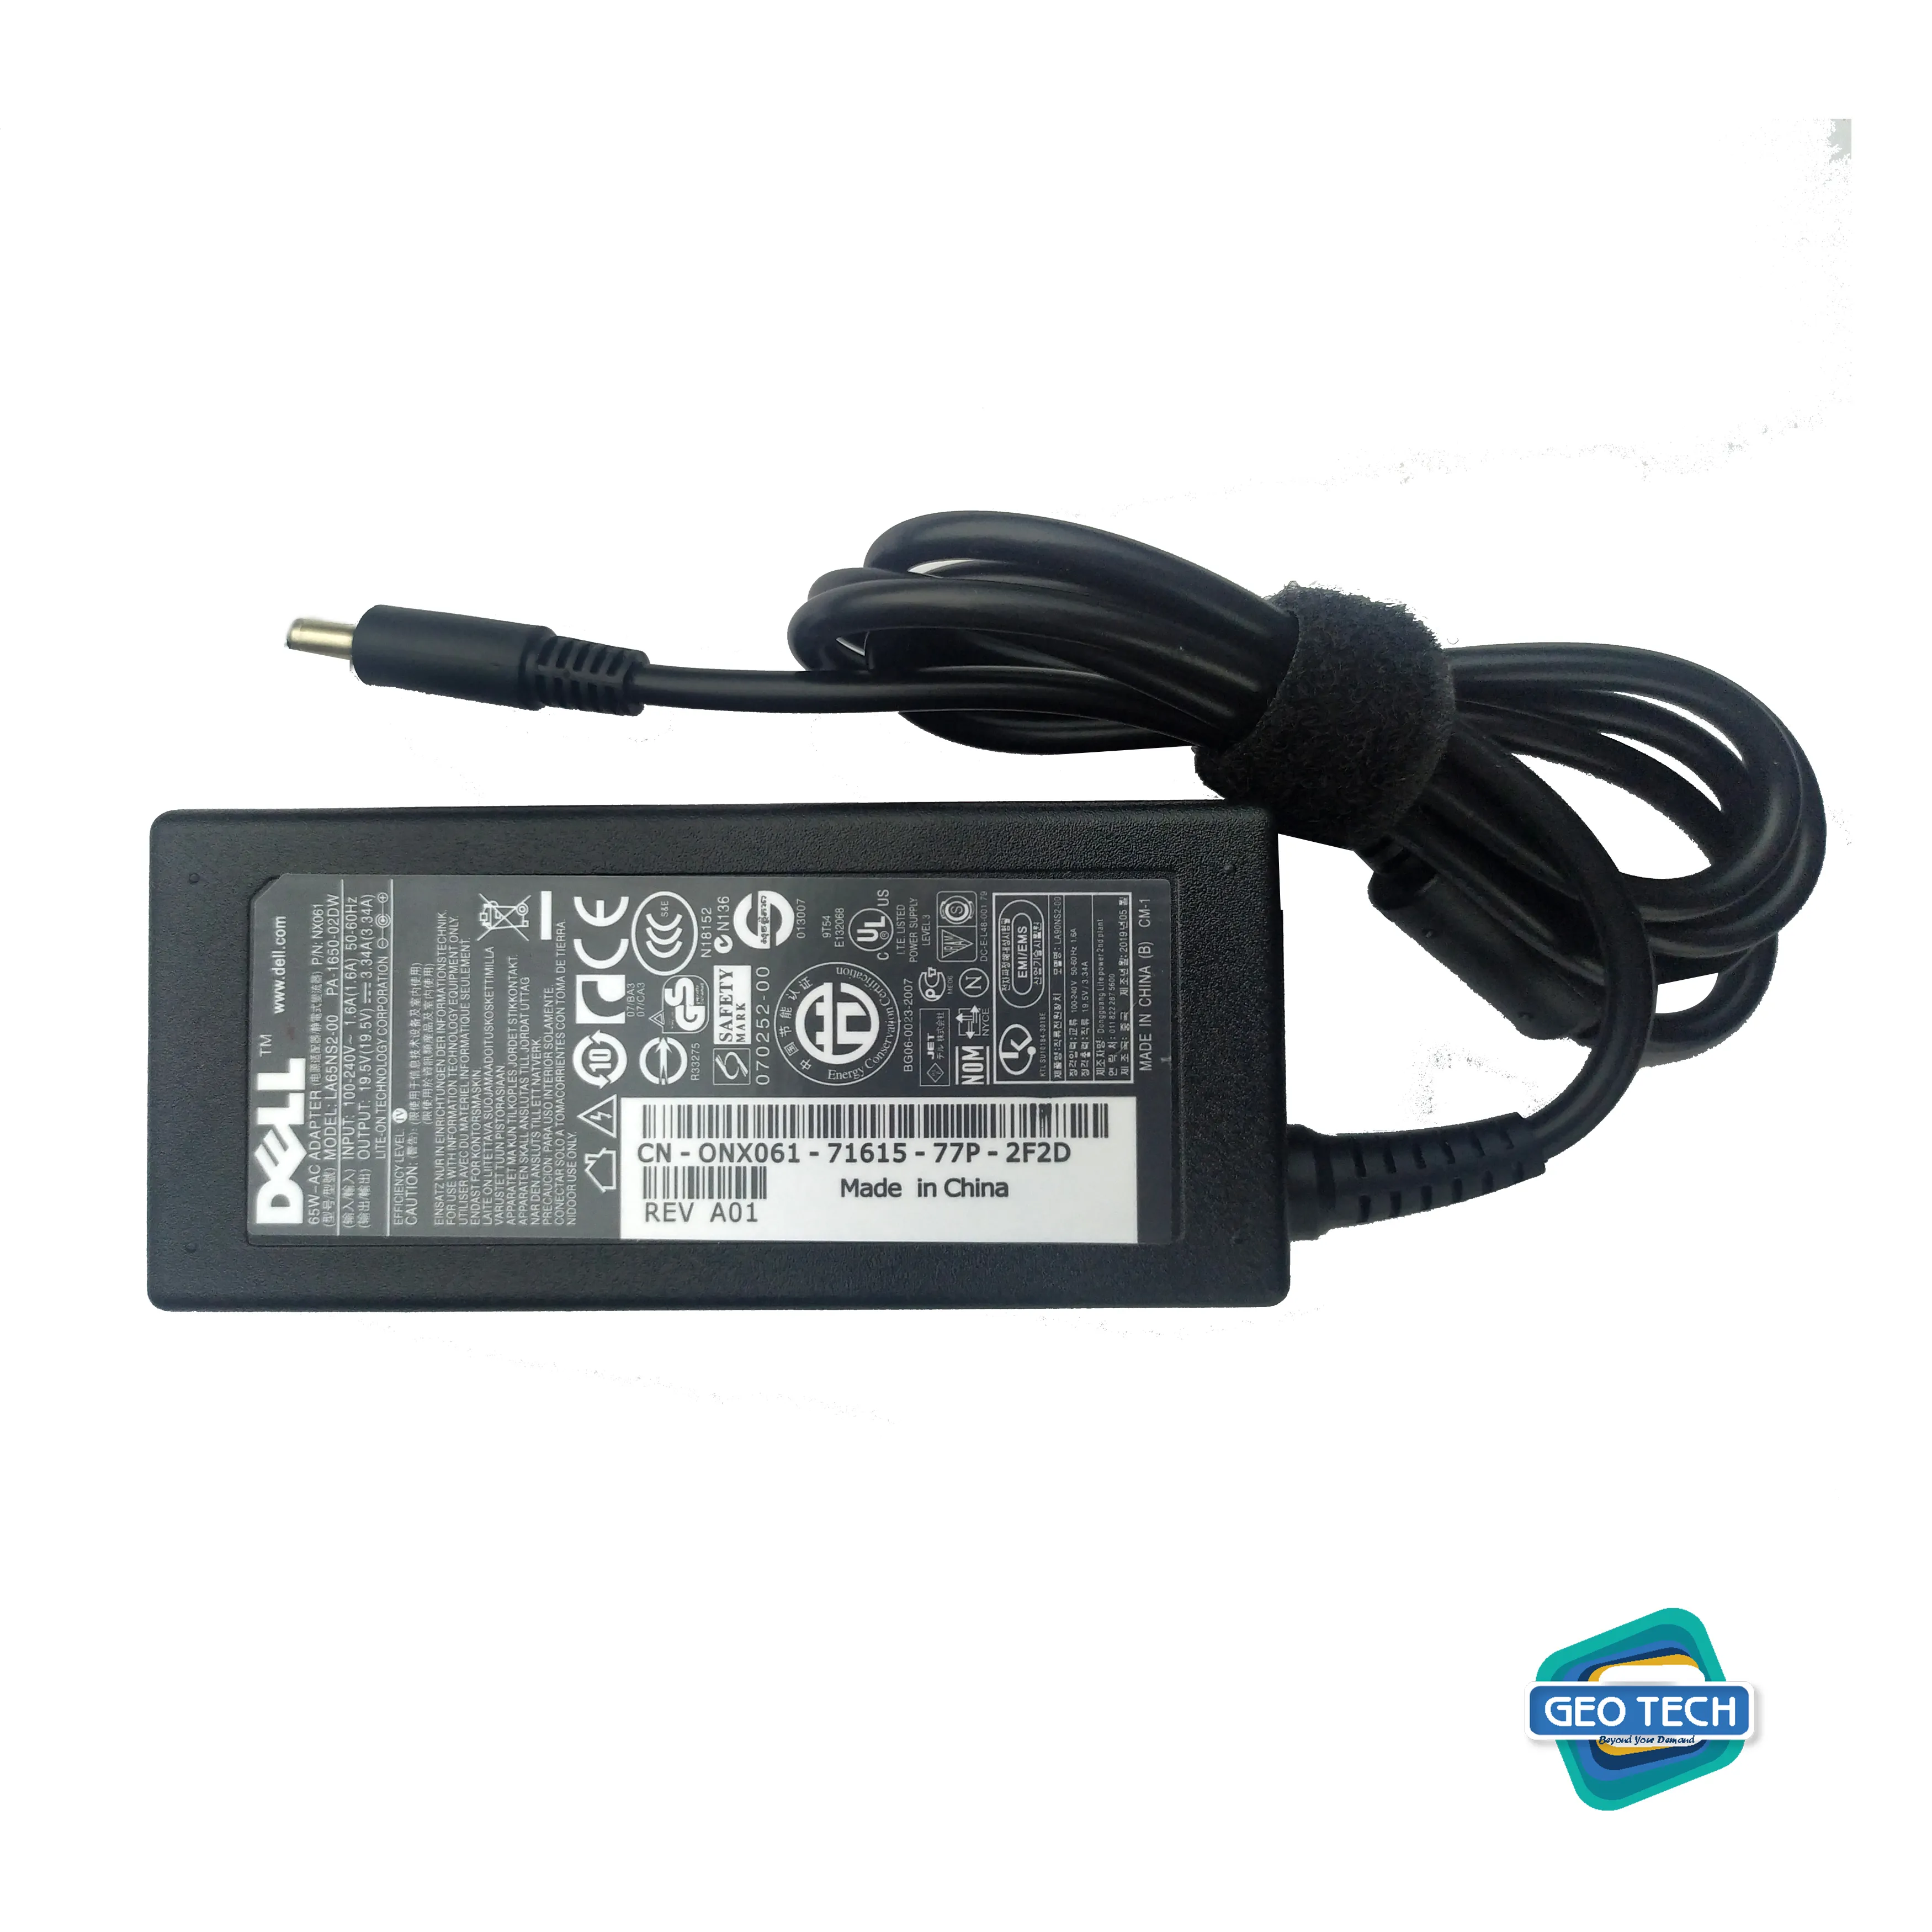 Dell 19.5v 3.34A 65W 7.4*5.0mm OEM Adapter Or Charger for Dell Laptop PA-12 family PA-1650-02DW NX061